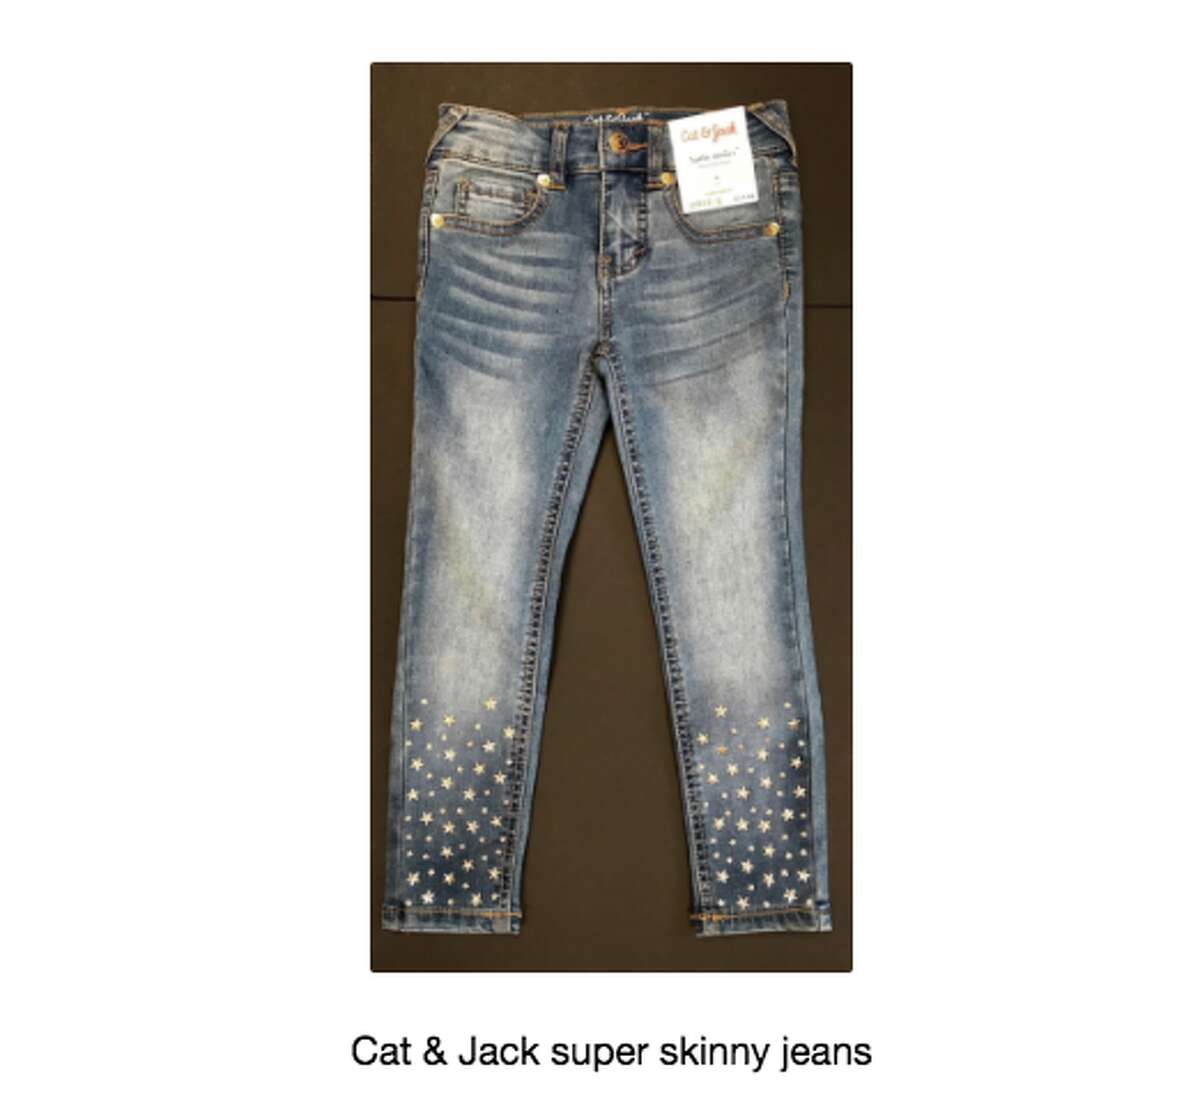 The Consumer Product Safety Commission issued a recall for 13,000 pairs of skinny jeans sold at Target. The jeans are embellished with star studs that have fallen off and injured people.